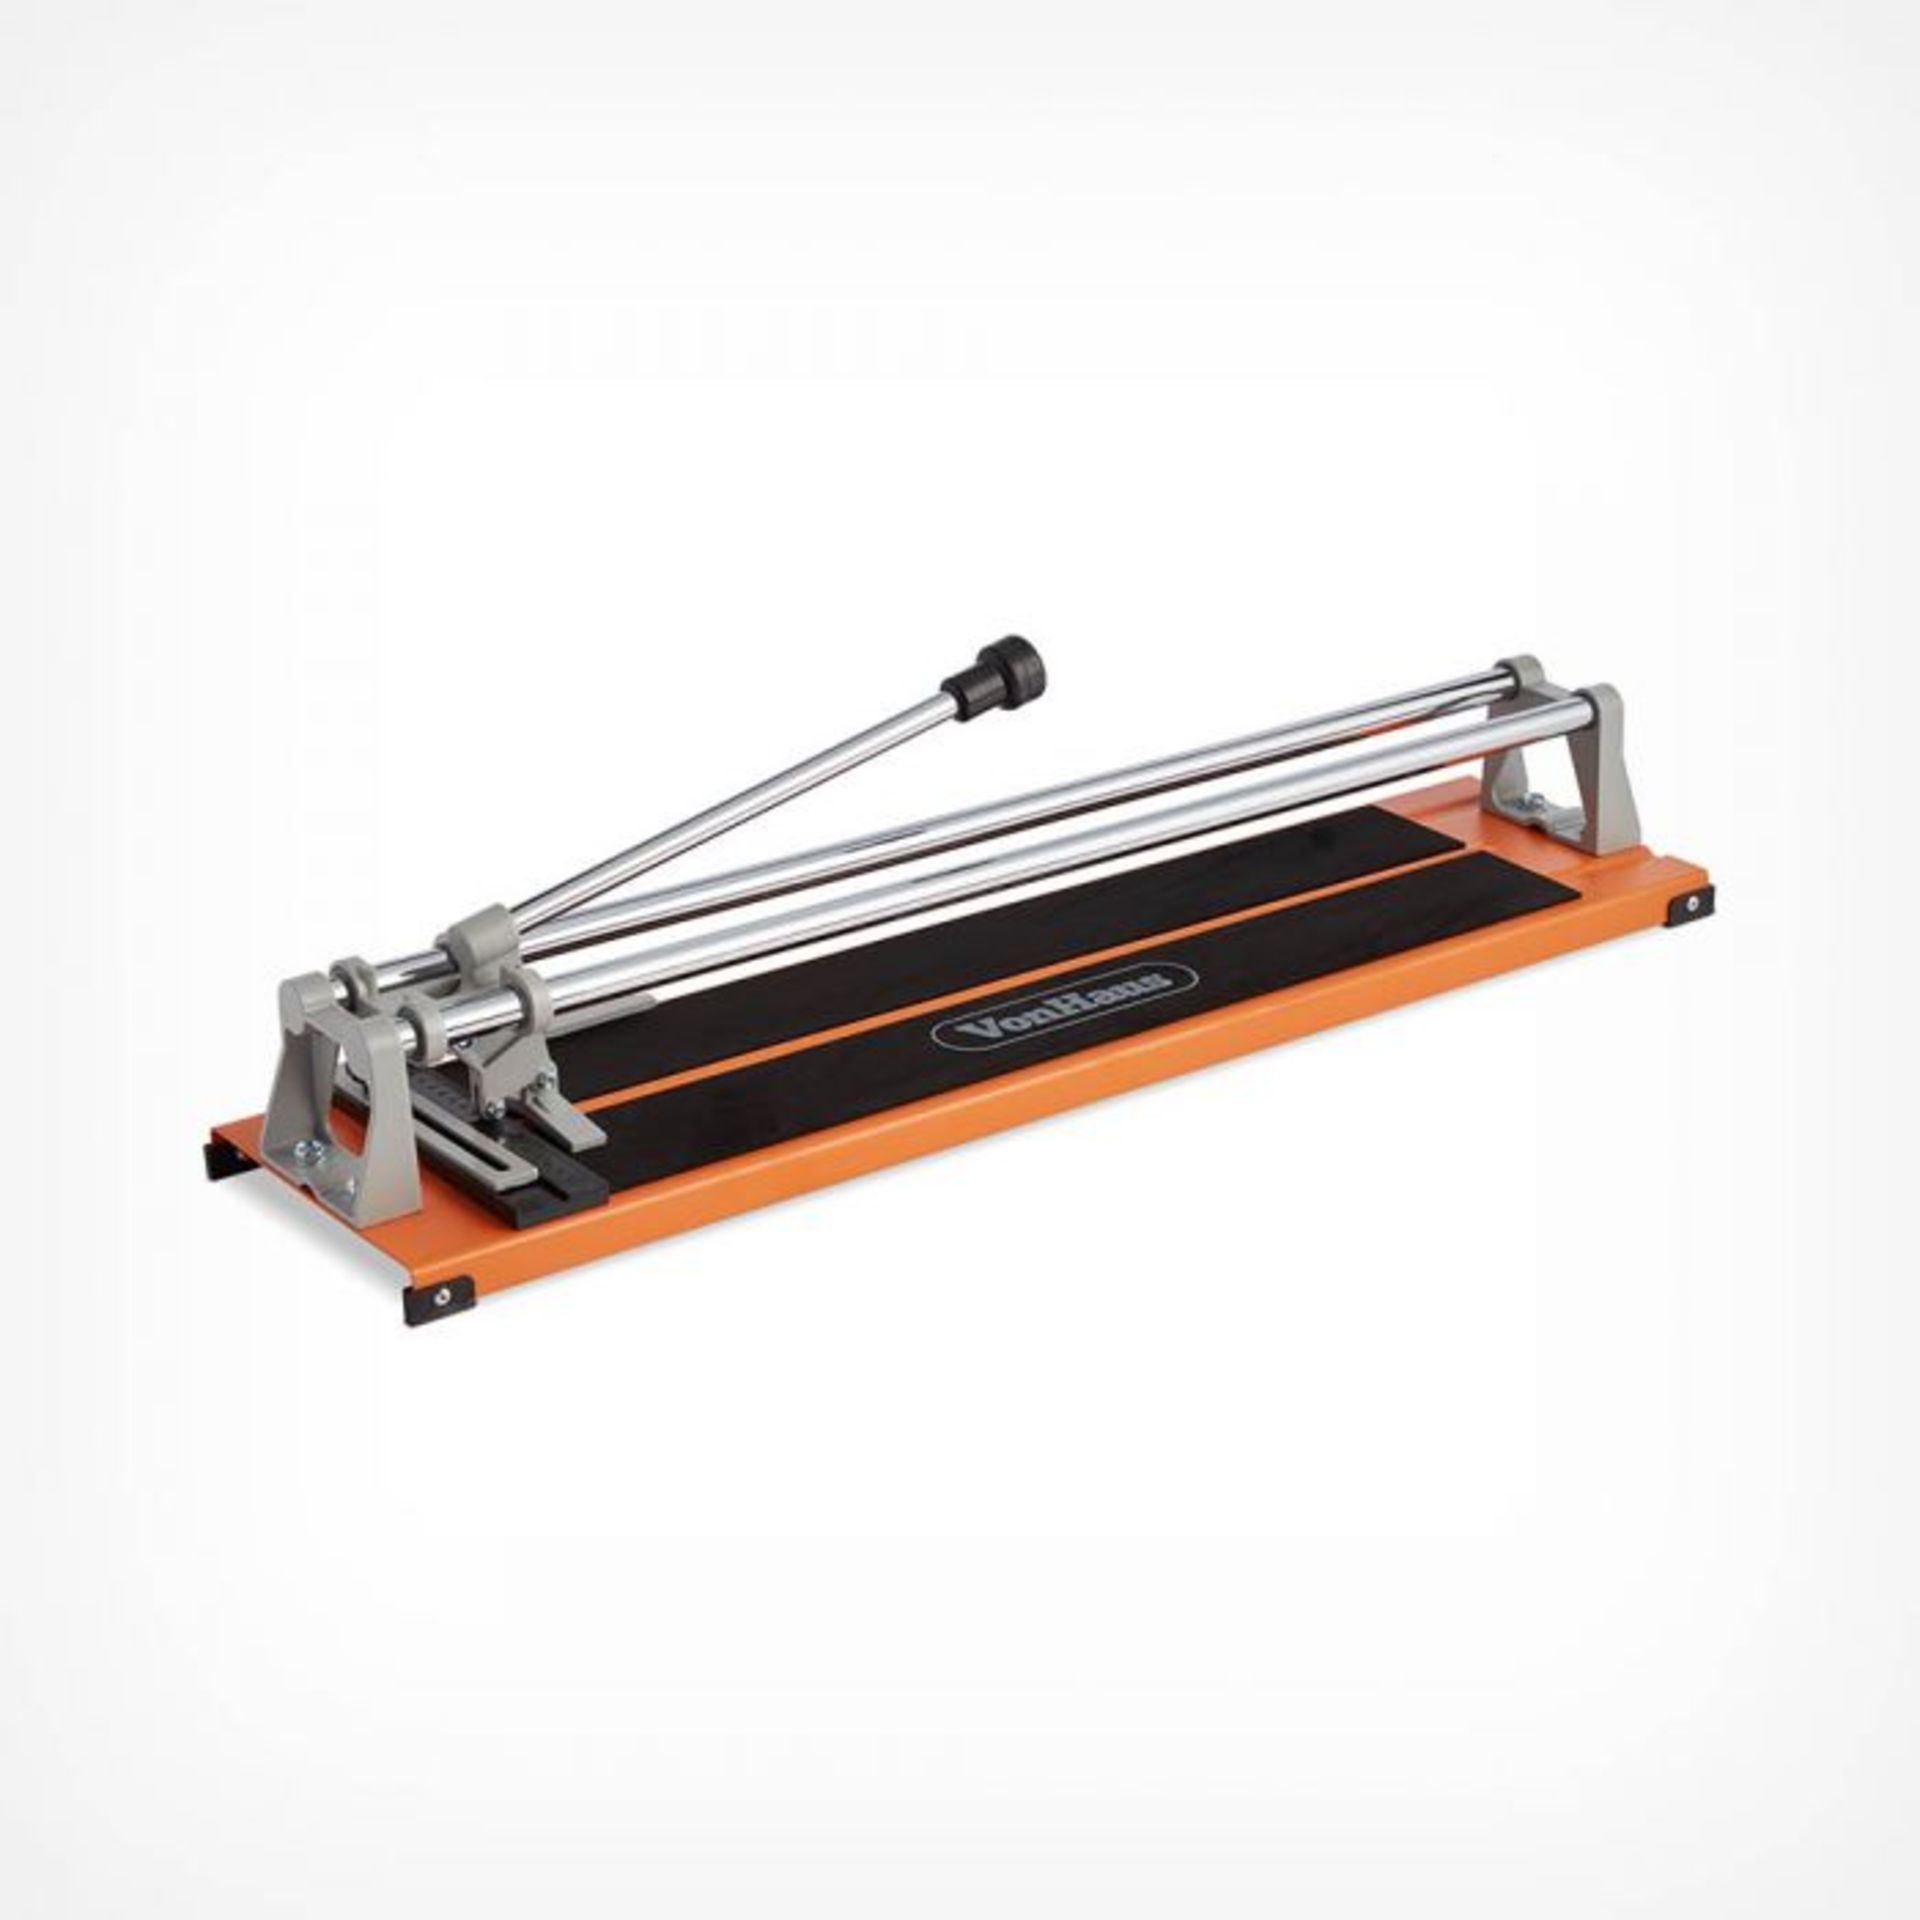 (S14) Manual Tile Cutter Make precise diagonal and straight cuts into floor and wall tiles eas... - Image 2 of 5